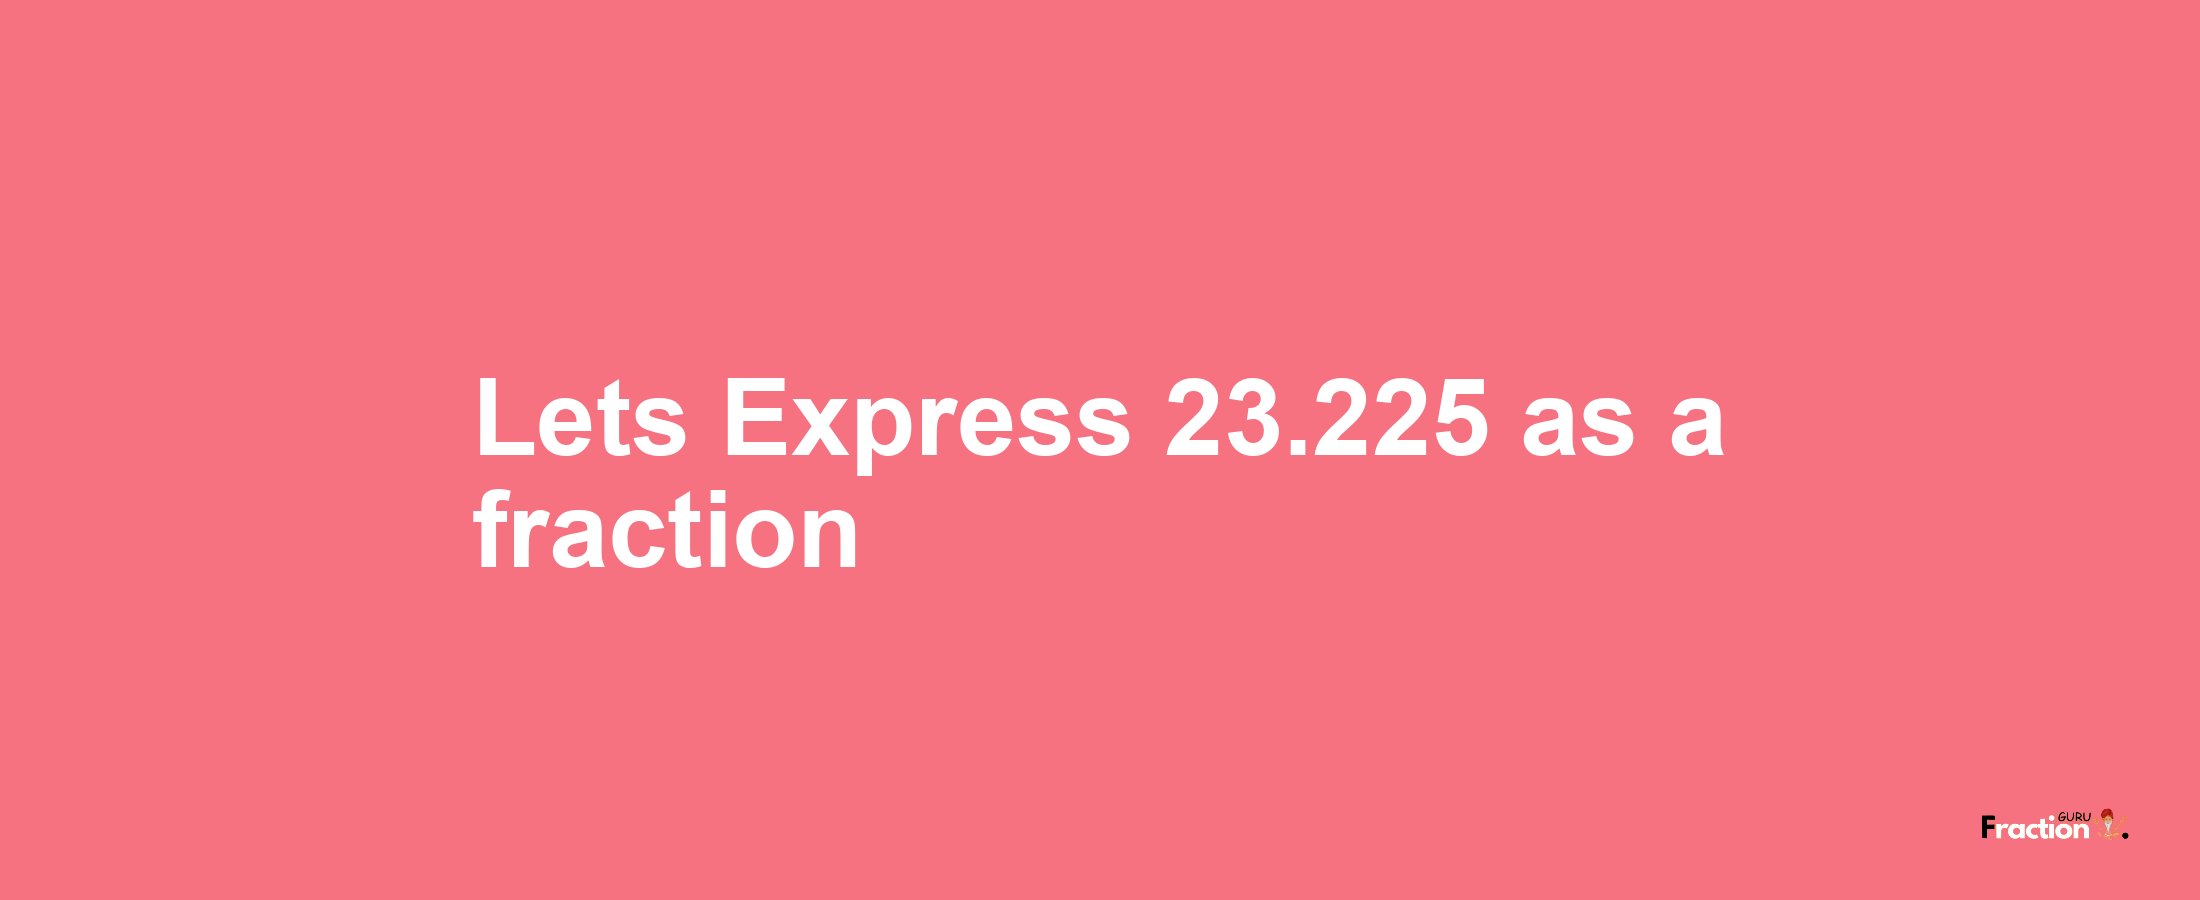 Lets Express 23.225 as afraction